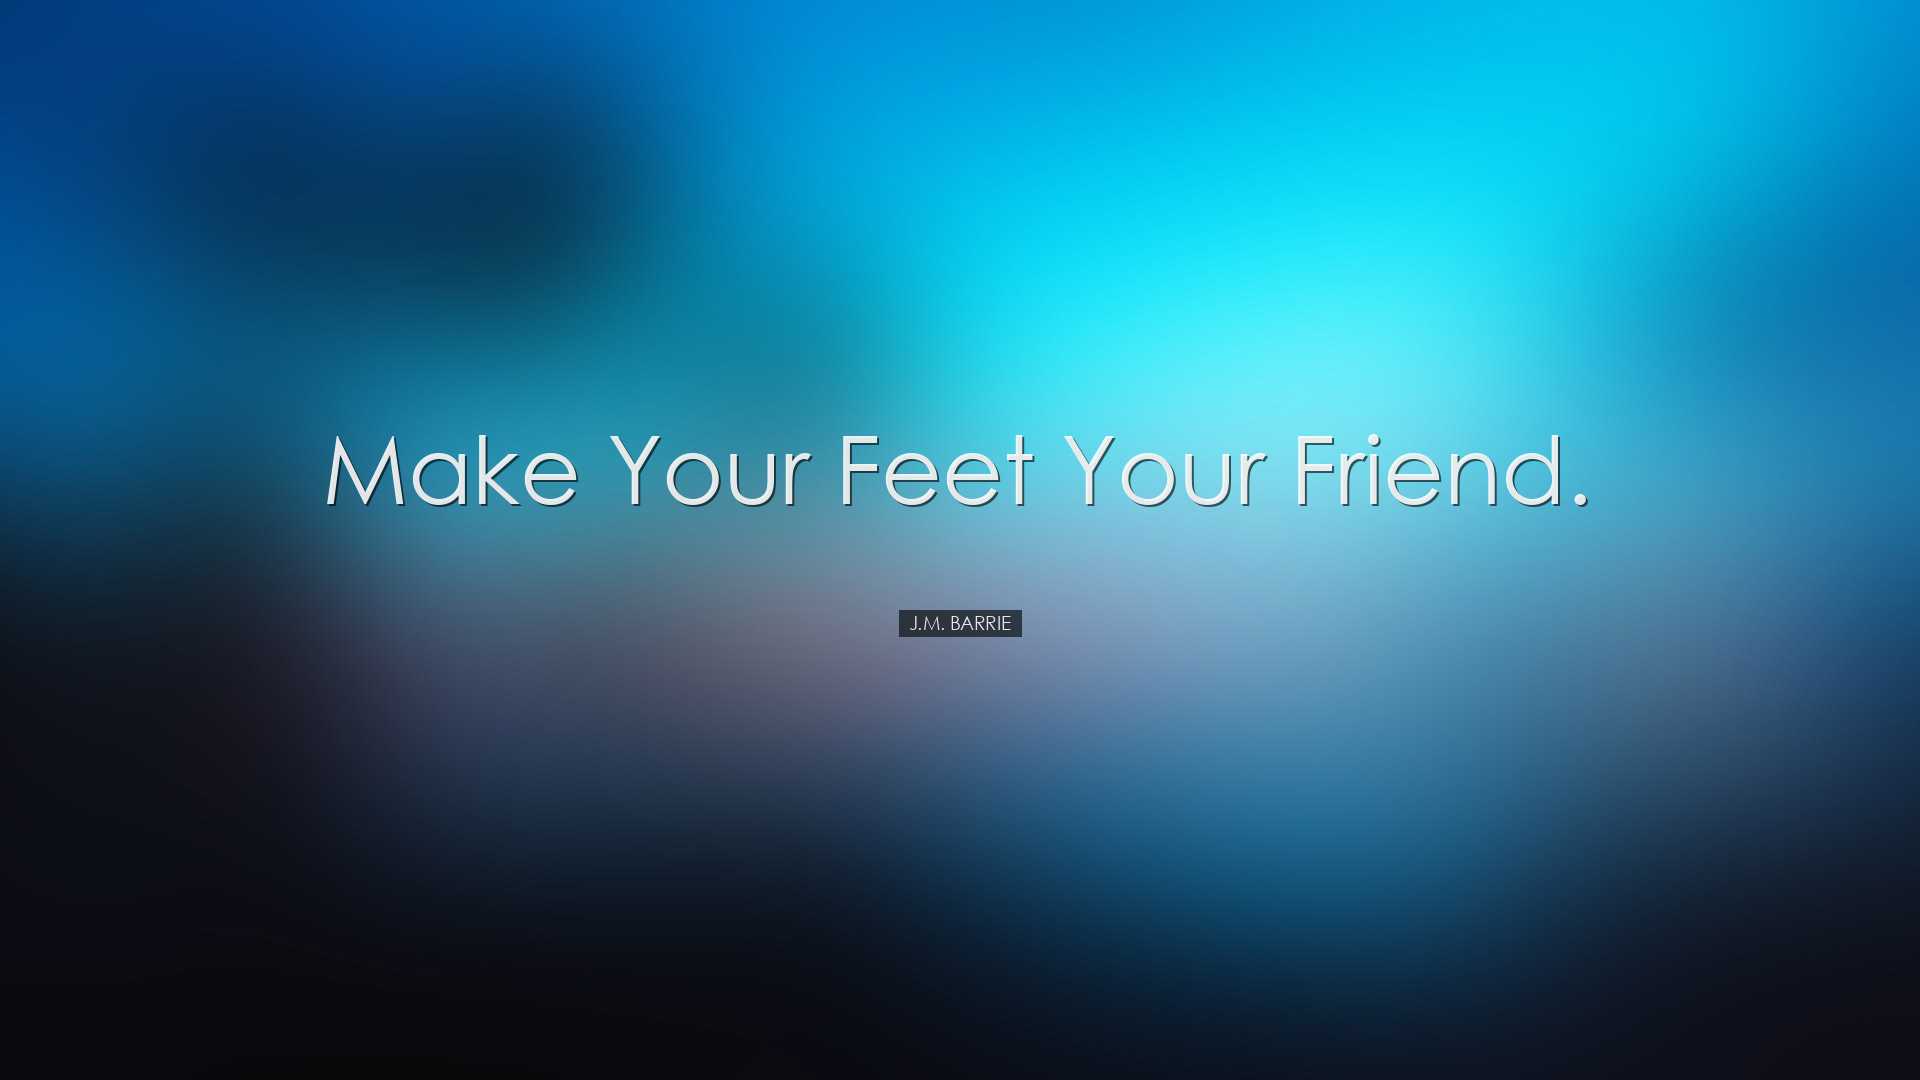 Make your feet your friend. - J.M. Barrie